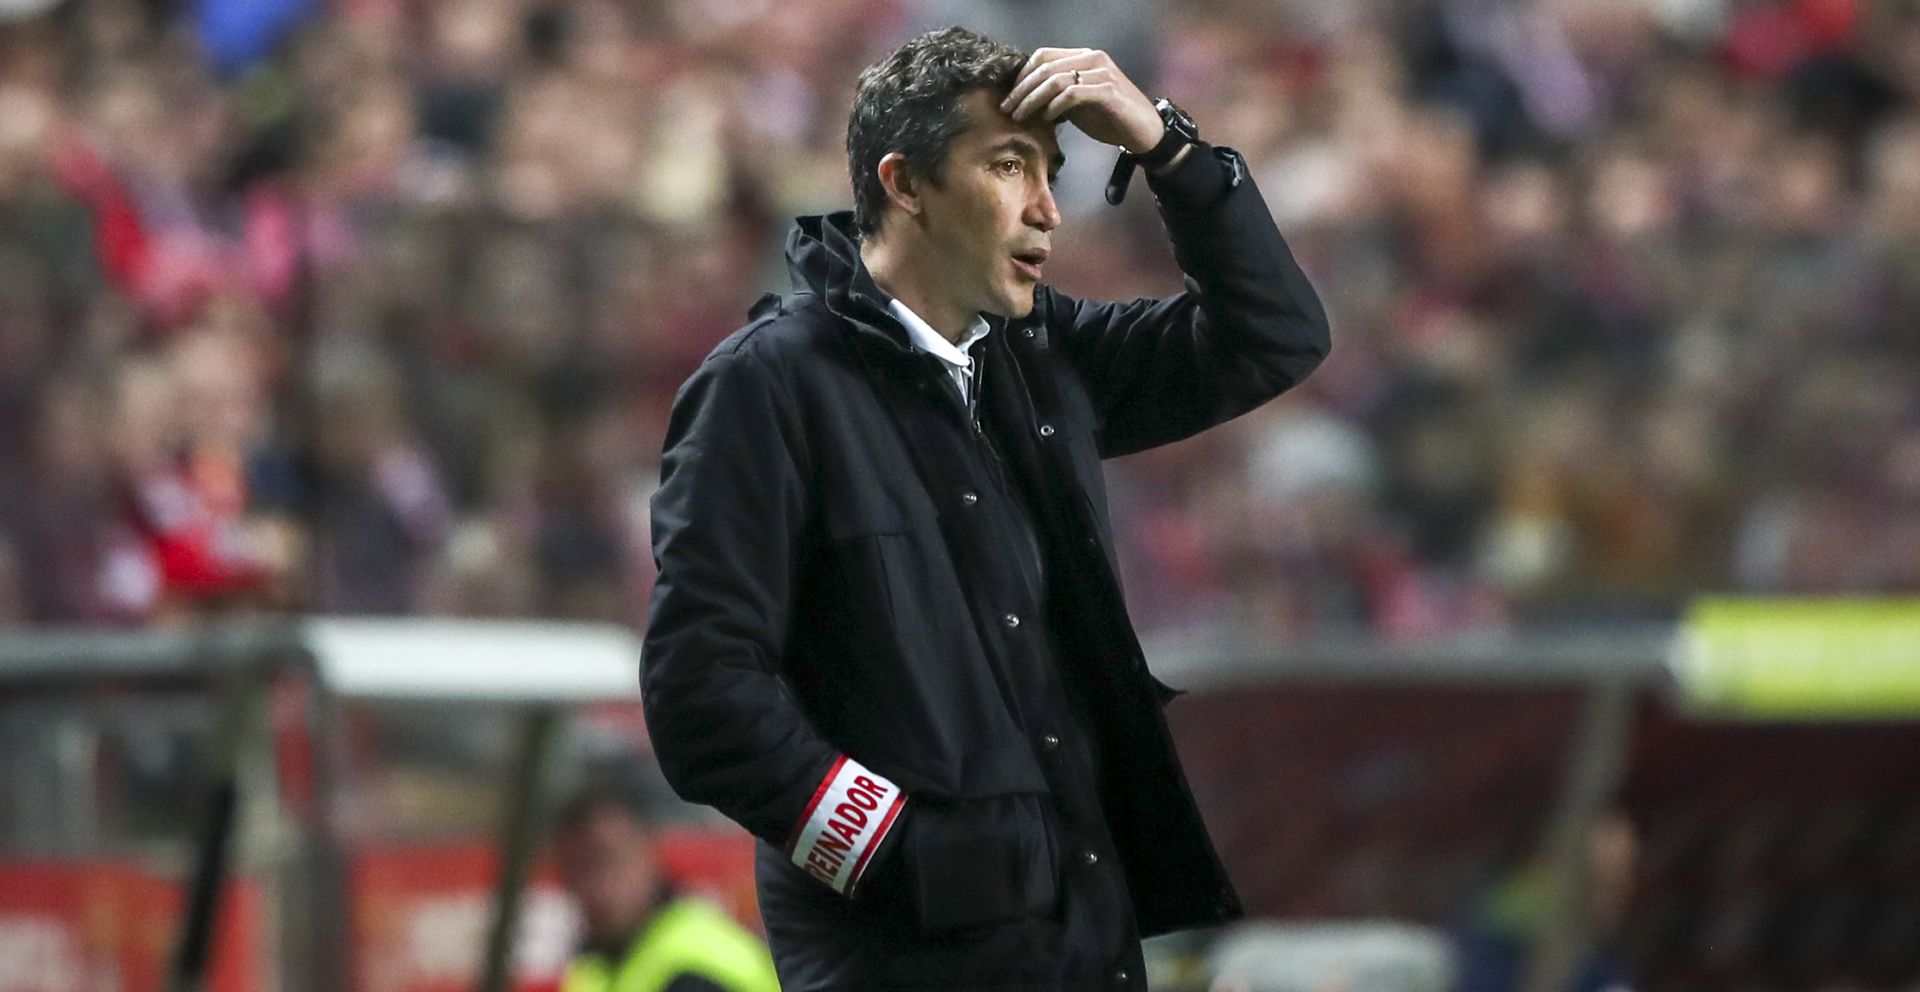 epa07429857 Benfica's head coach Bruno Lage reacts during their First League Soccer match against Belenenses Sad, held at Luz Stadium, Lisbon, Portugal, 11 March 2019.  EPA/JOSE SENA GOULAO